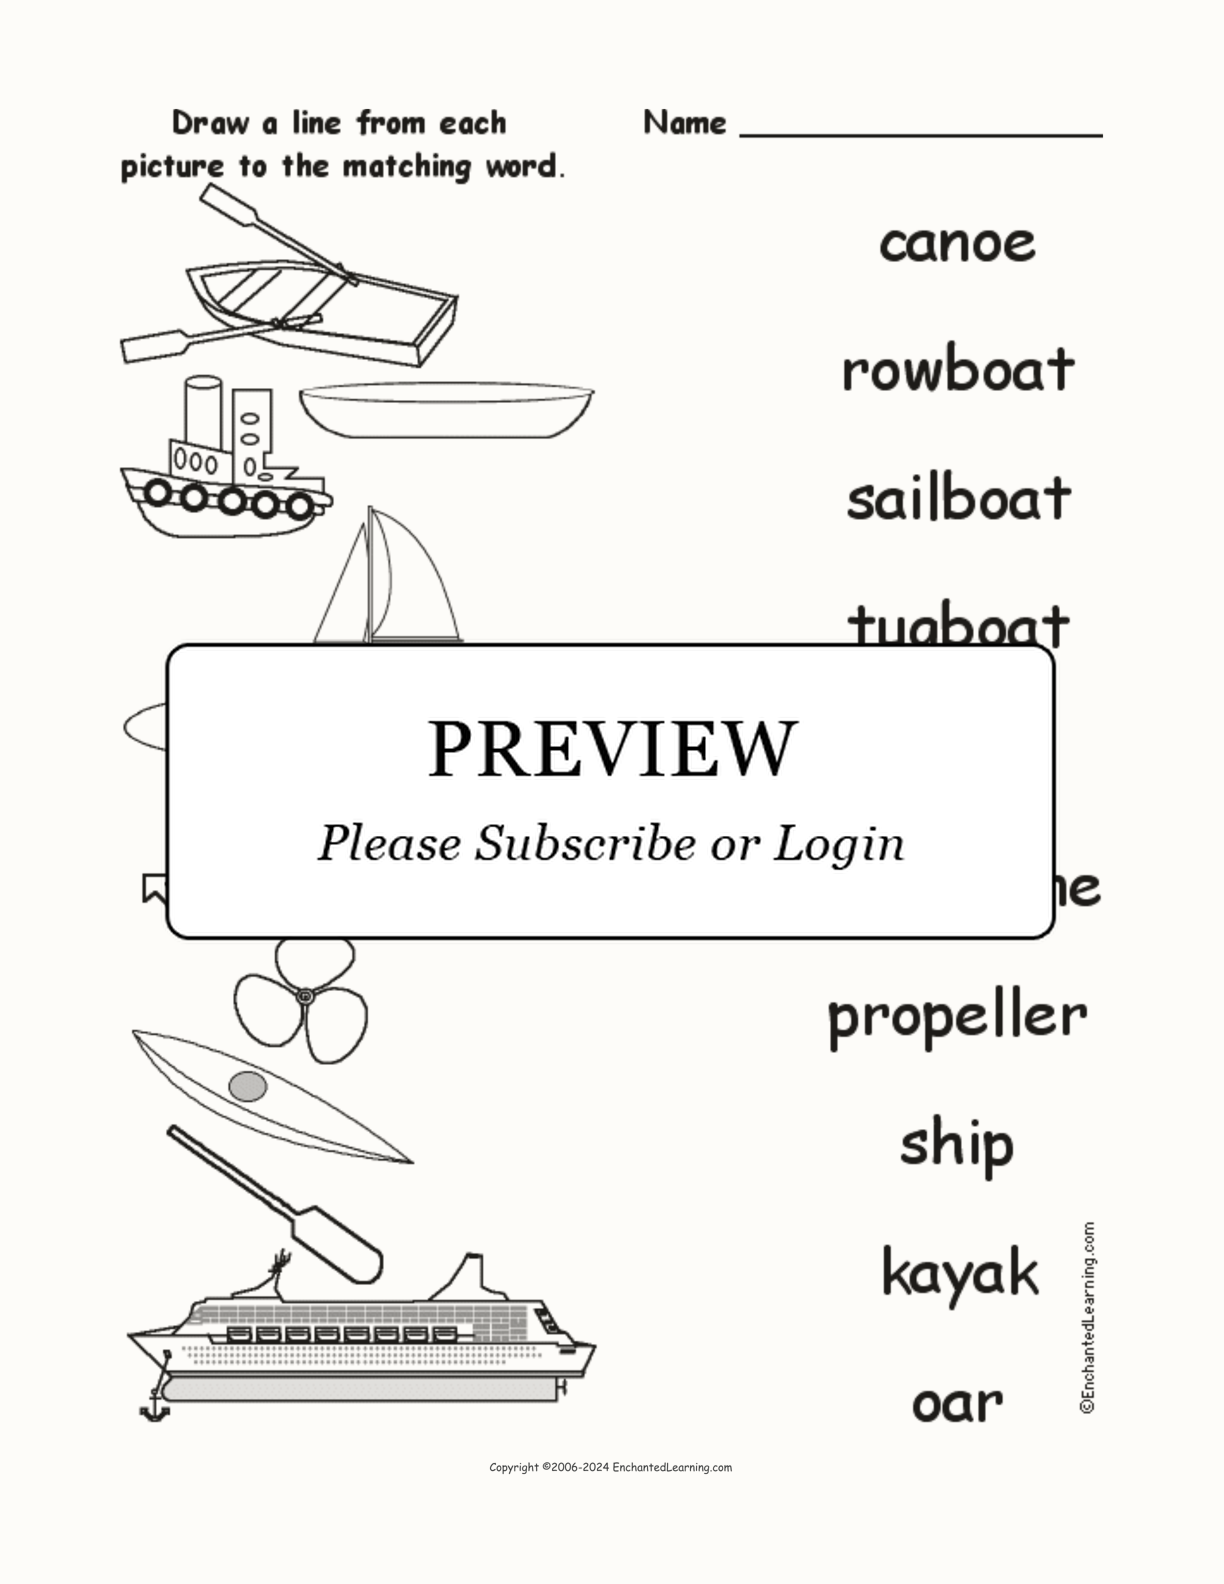 Match Each Boat Word to its Picture interactive worksheet page 1